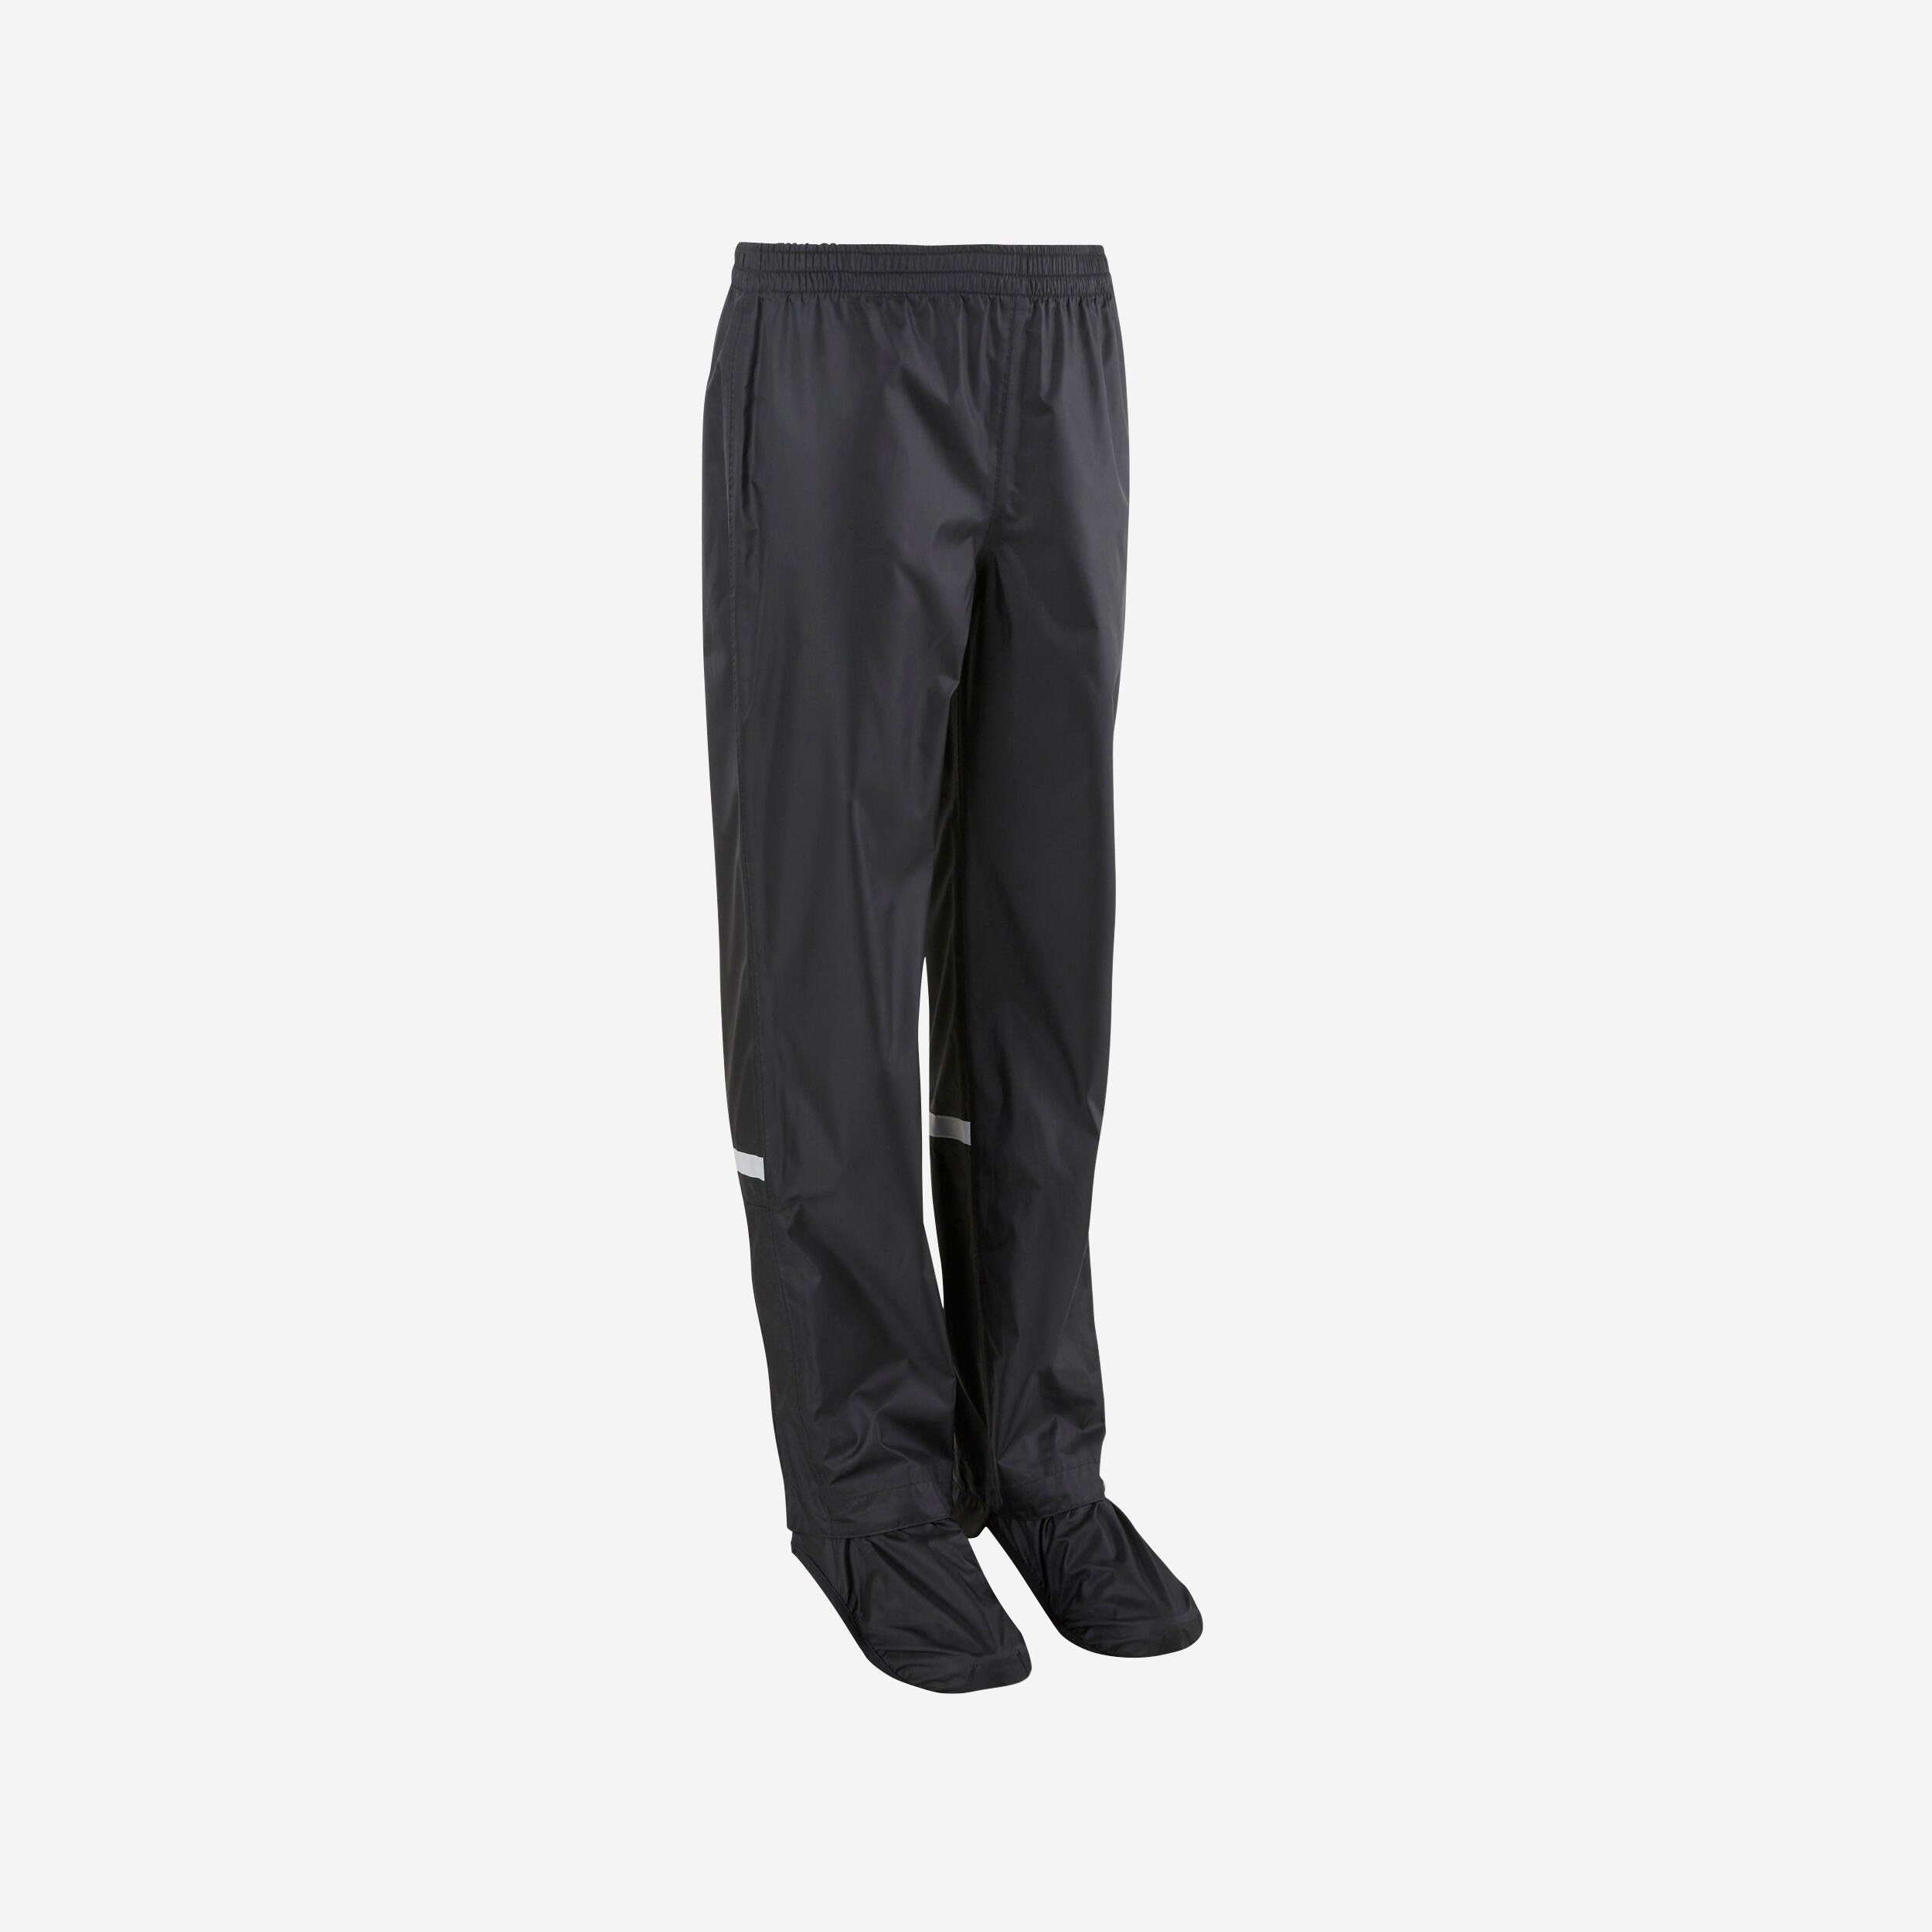 decathlon cycling trousers